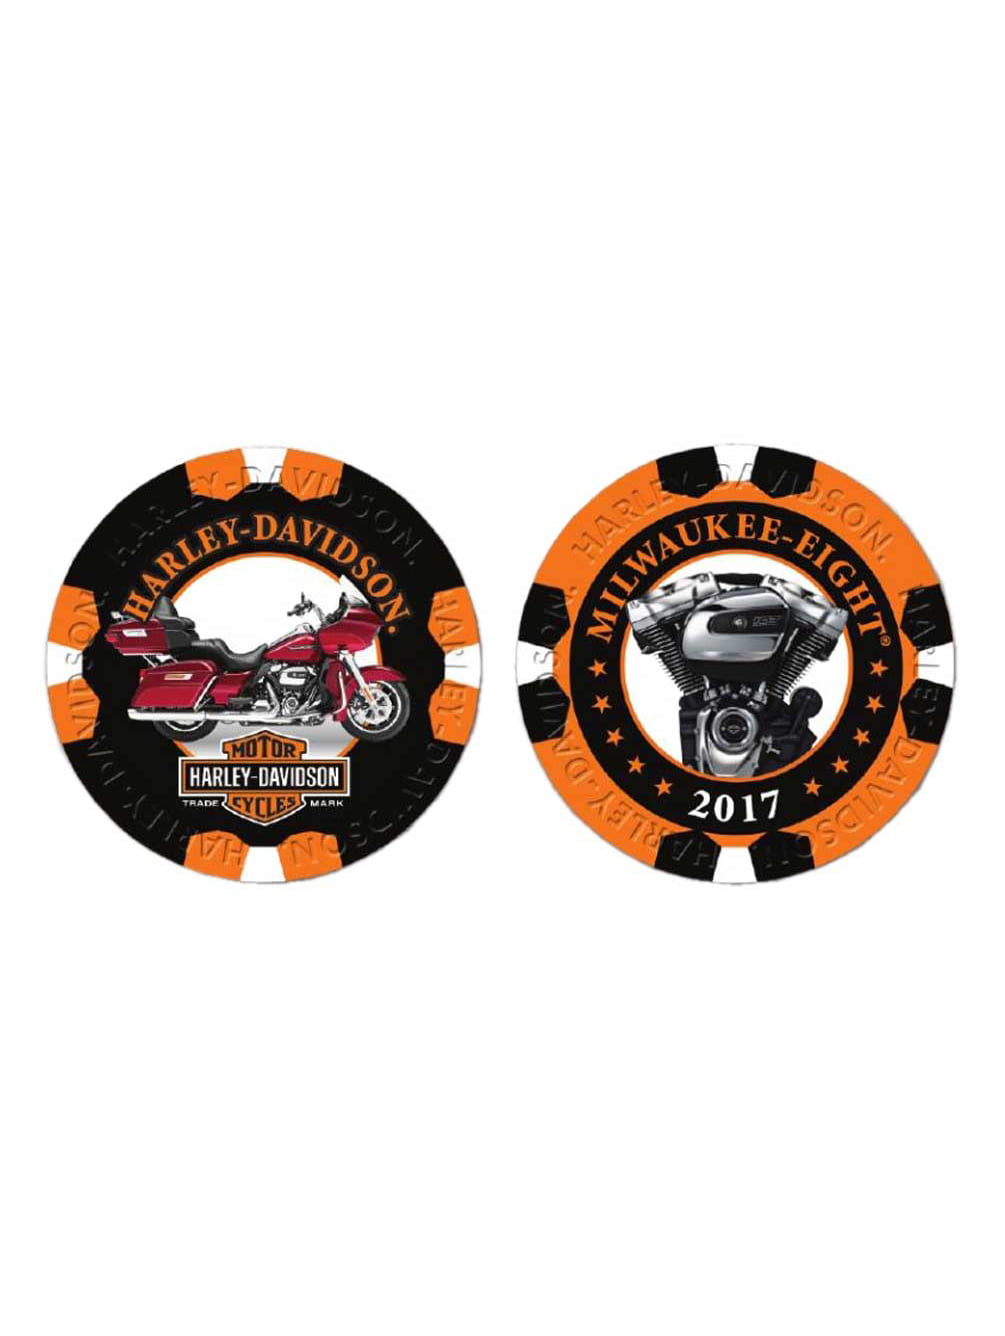 See Details for Colors Available Harley Davidson Hollywood CA Poker Chip